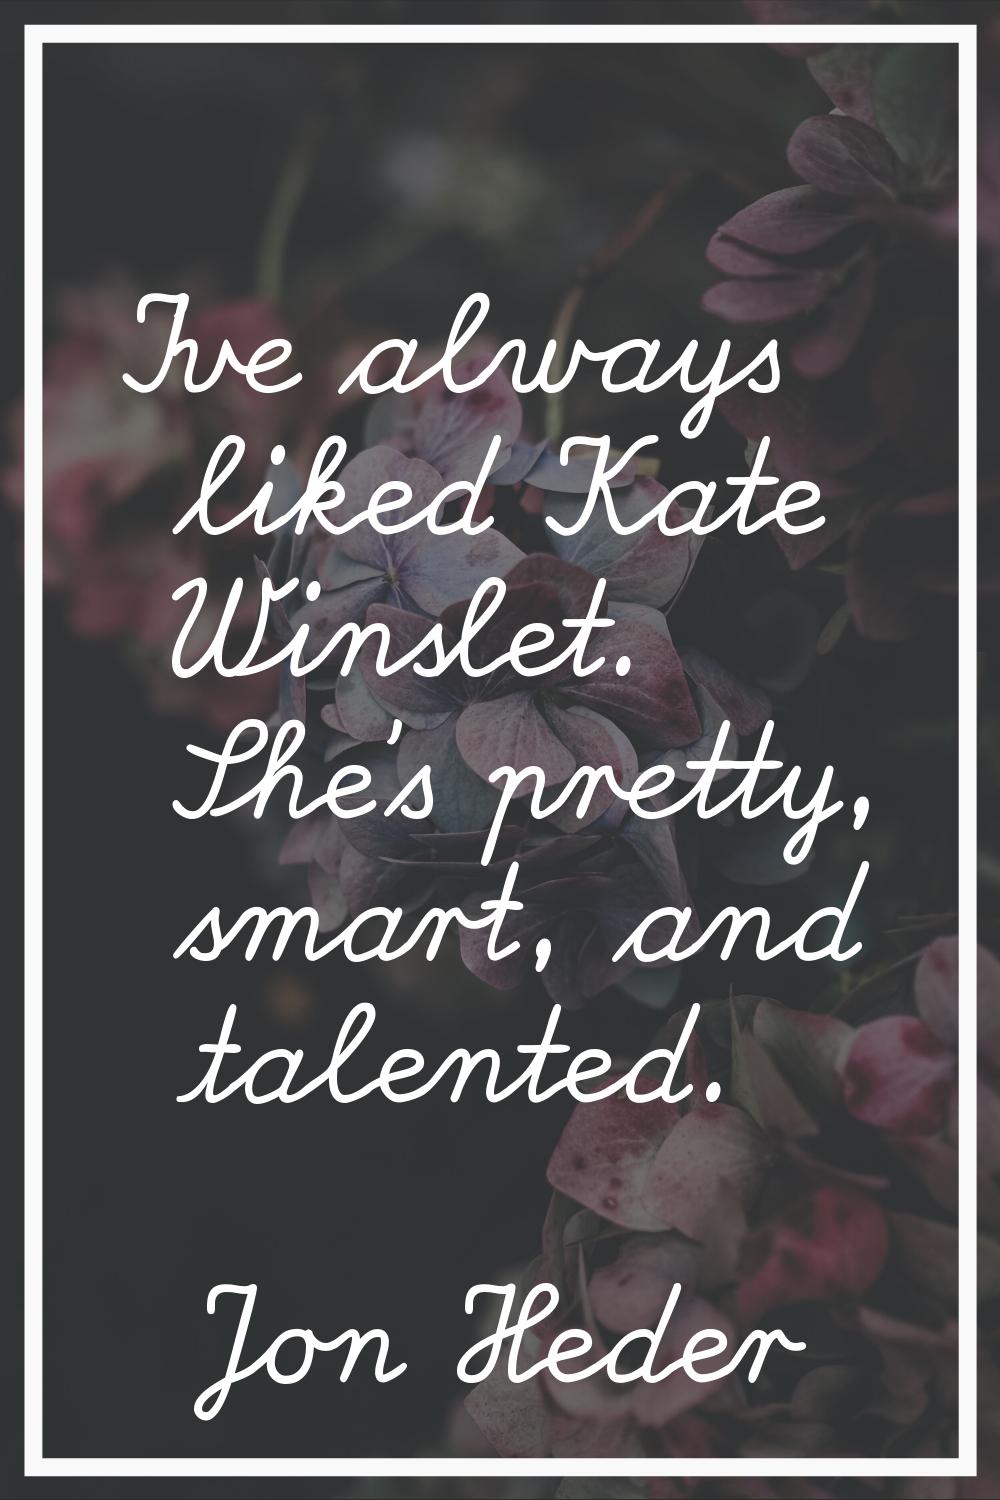 I've always liked Kate Winslet. She's pretty, smart, and talented.